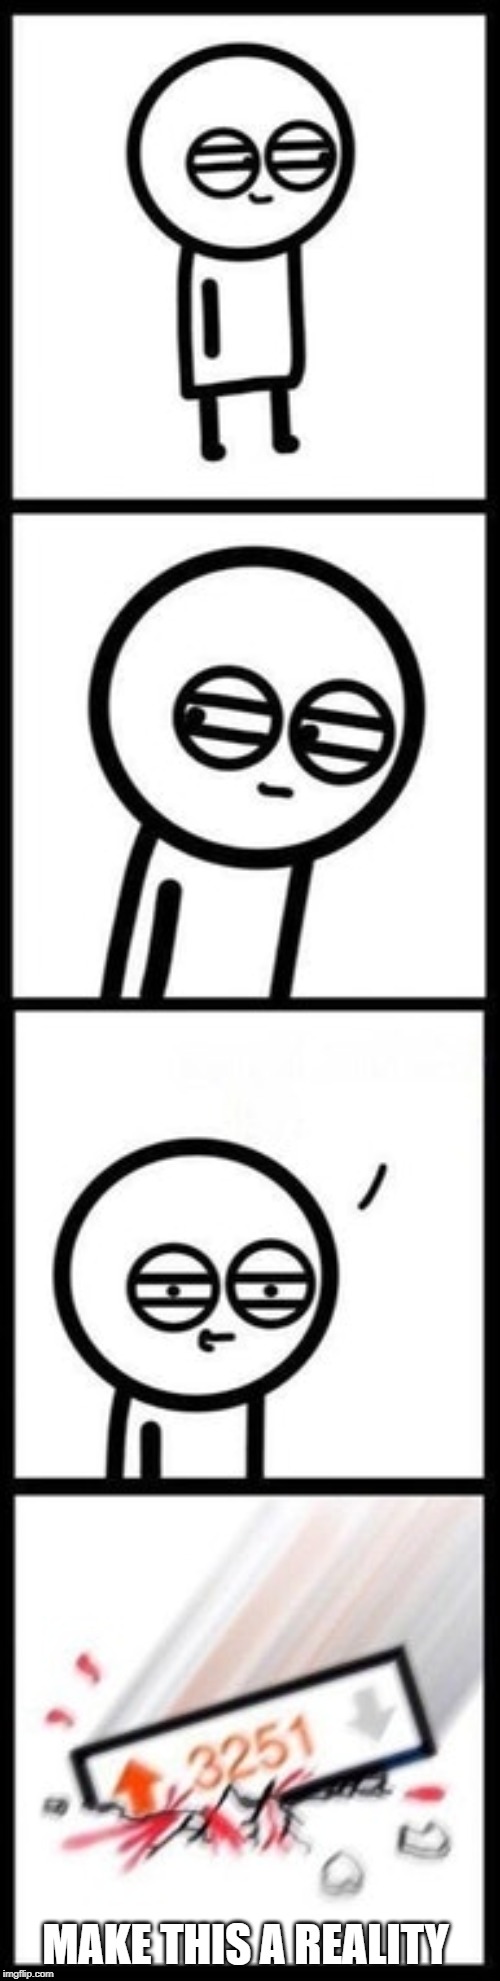 3251 upvotes | MAKE THIS A REALITY | image tagged in 3251 upvotes | made w/ Imgflip meme maker